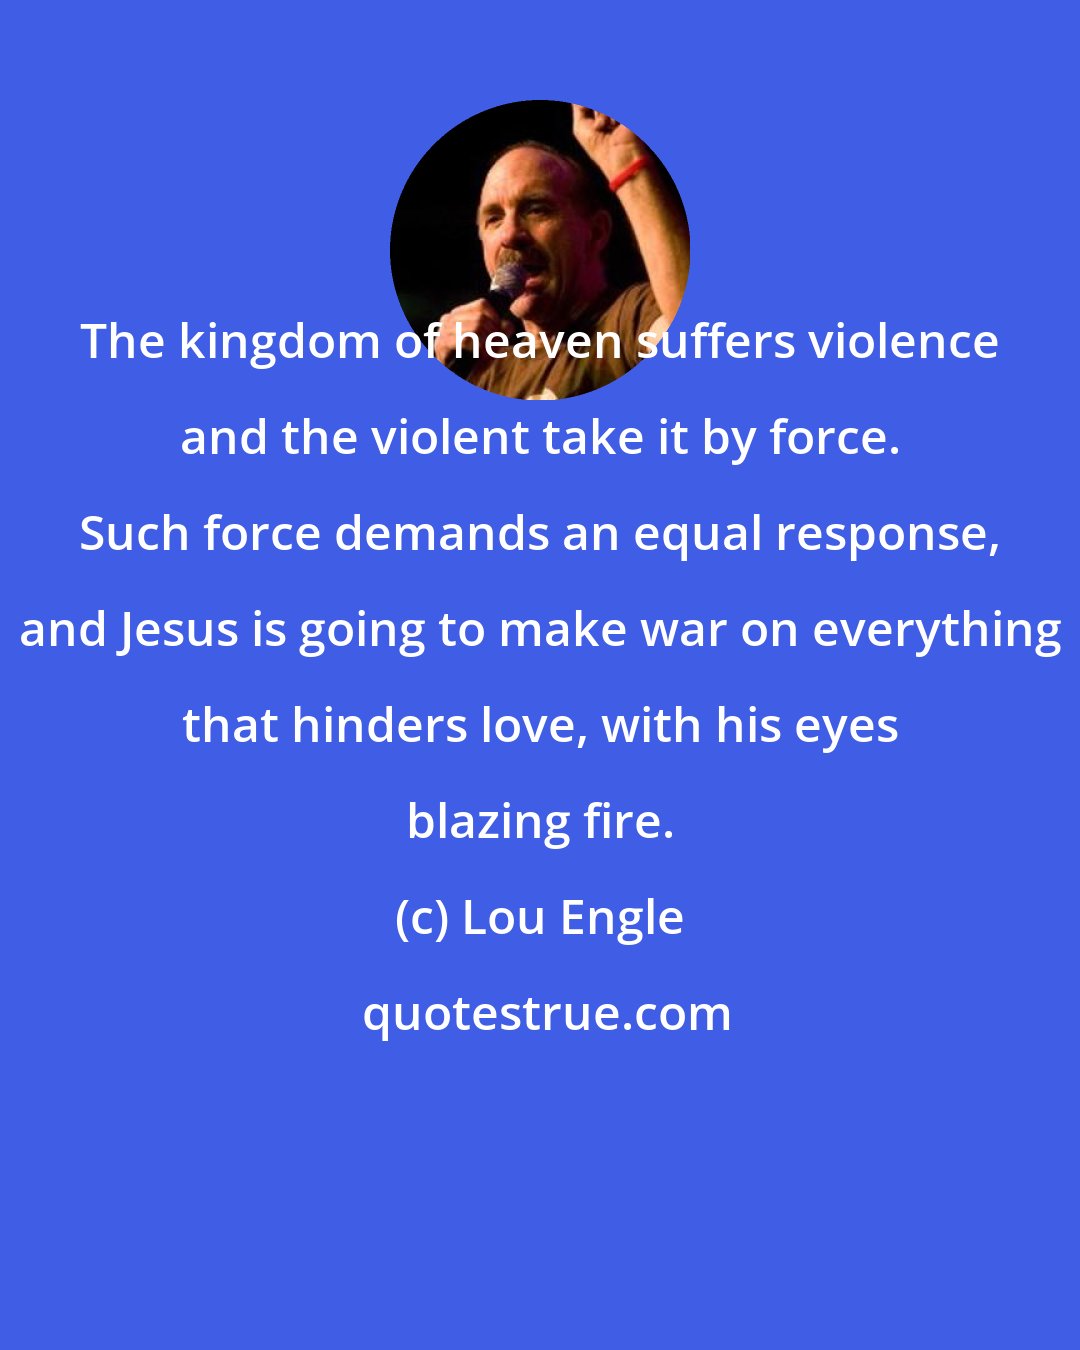 Lou Engle: The kingdom of heaven suffers violence and the violent take it by force. Such force demands an equal response, and Jesus is going to make war on everything that hinders love, with his eyes blazing fire.